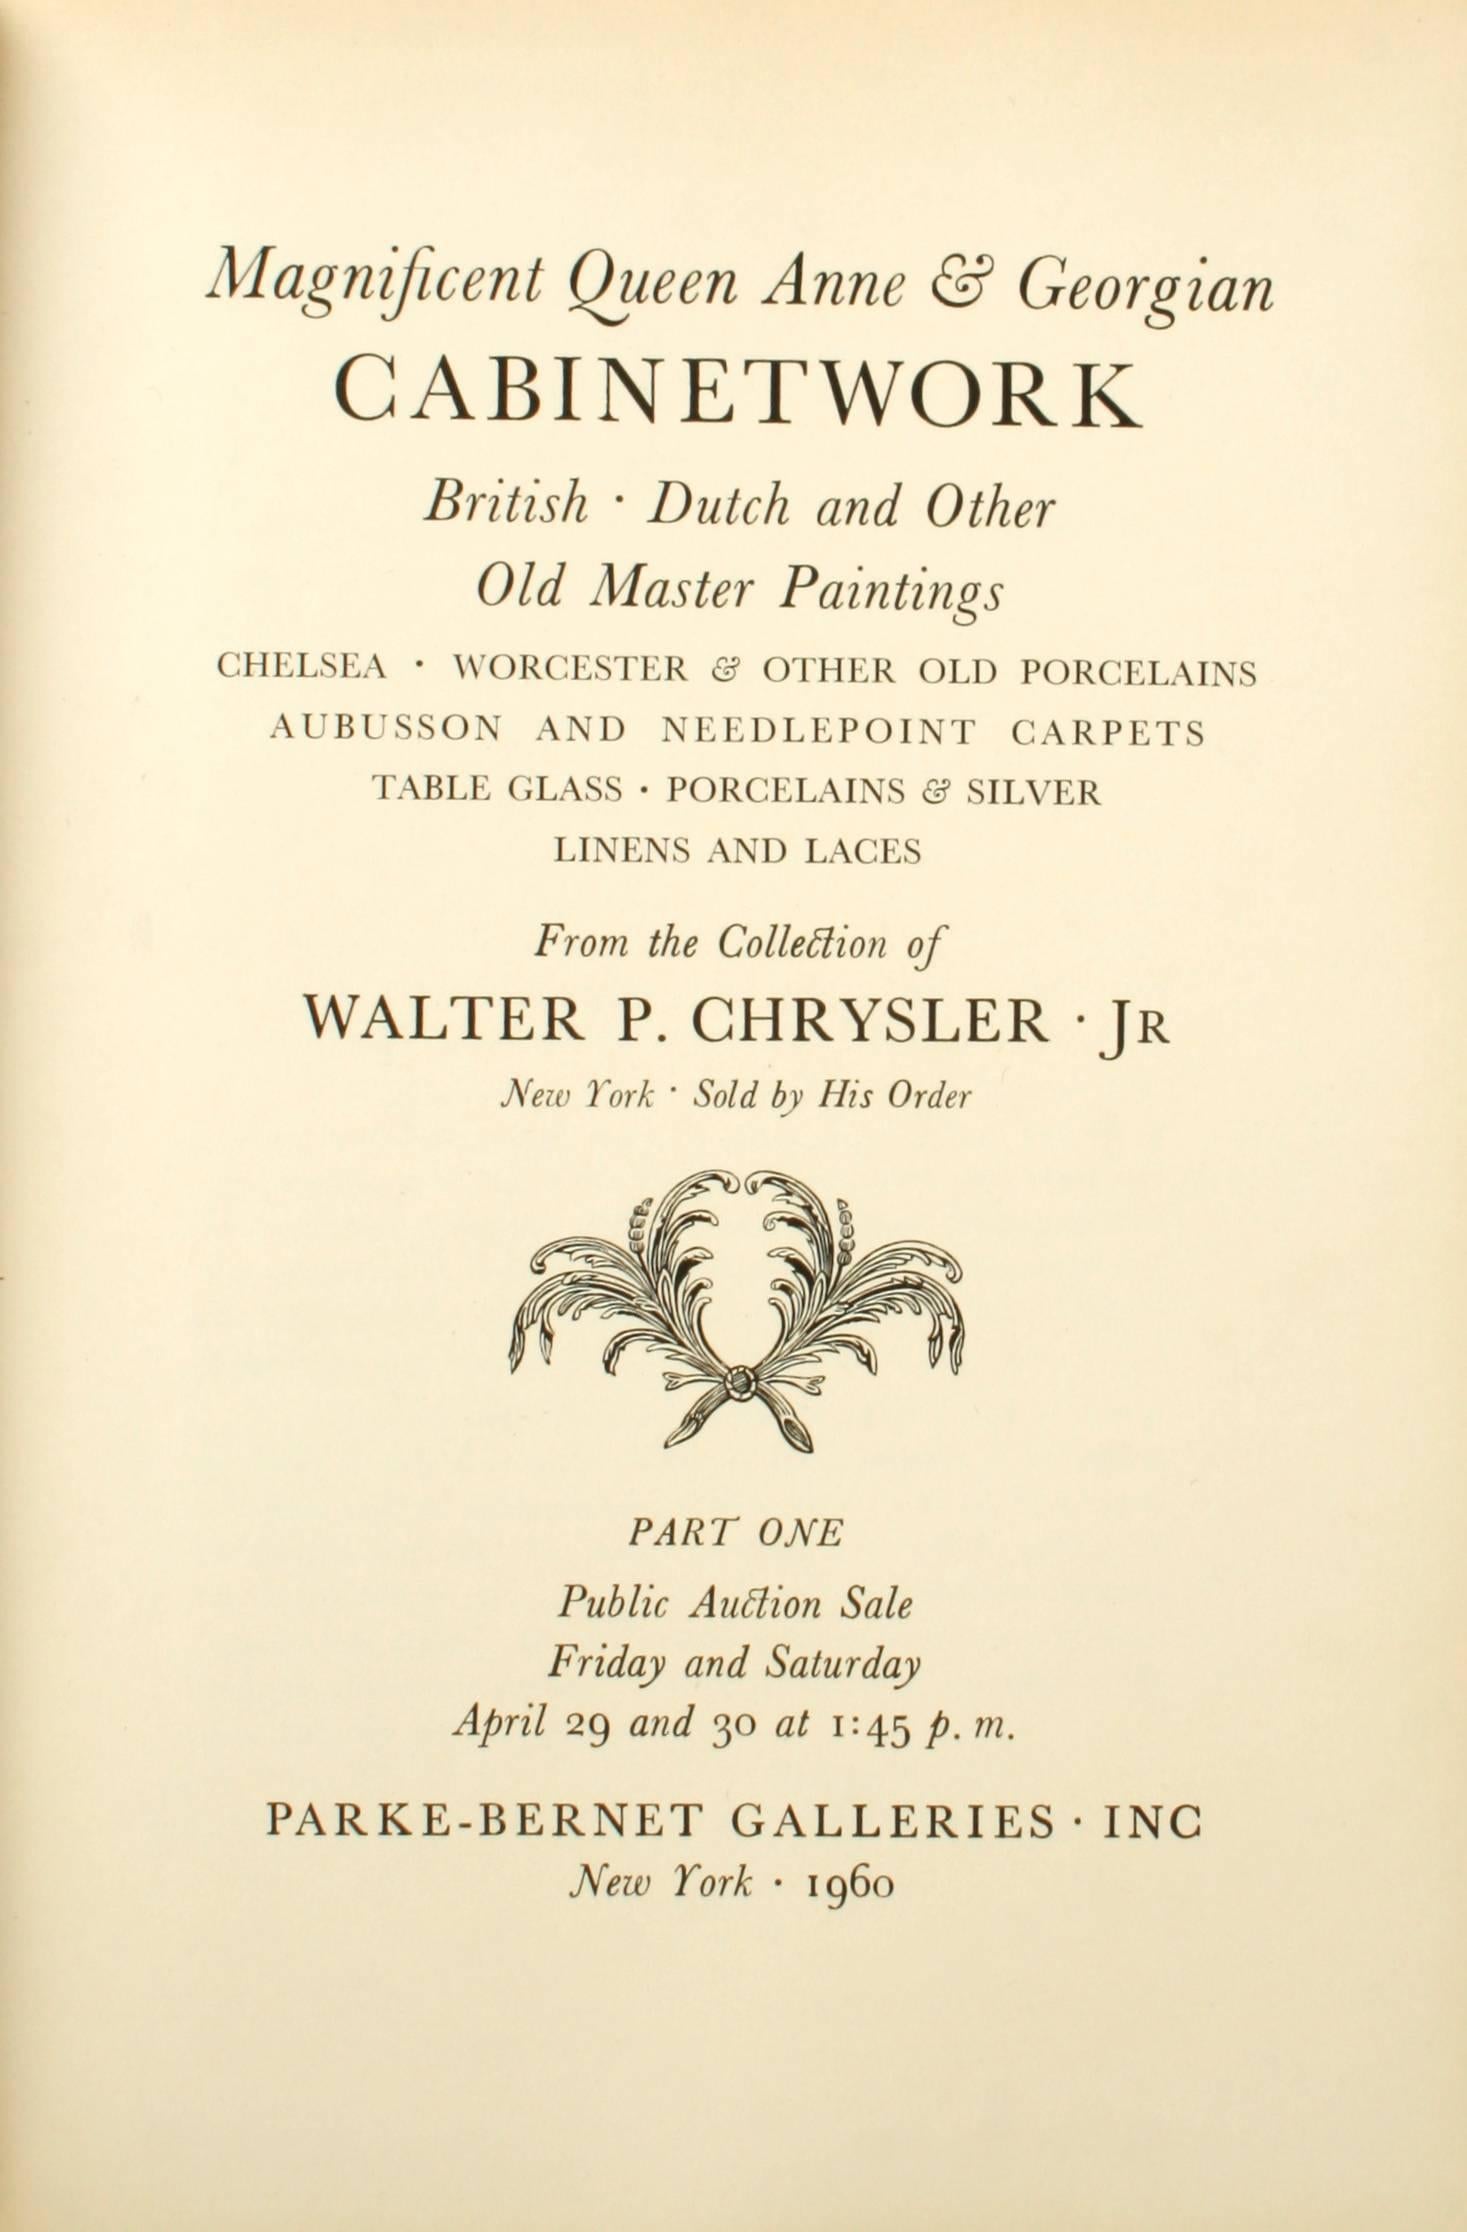 Auction catalogues from the Walter Chrysler Jr. Collection of English Furniture in two volumes. New York: Parke-Bernet Galleries, Inc., 1960. First edition hardcovers with no dust jackets as issued. Part one includes Queen Anne and Georgian